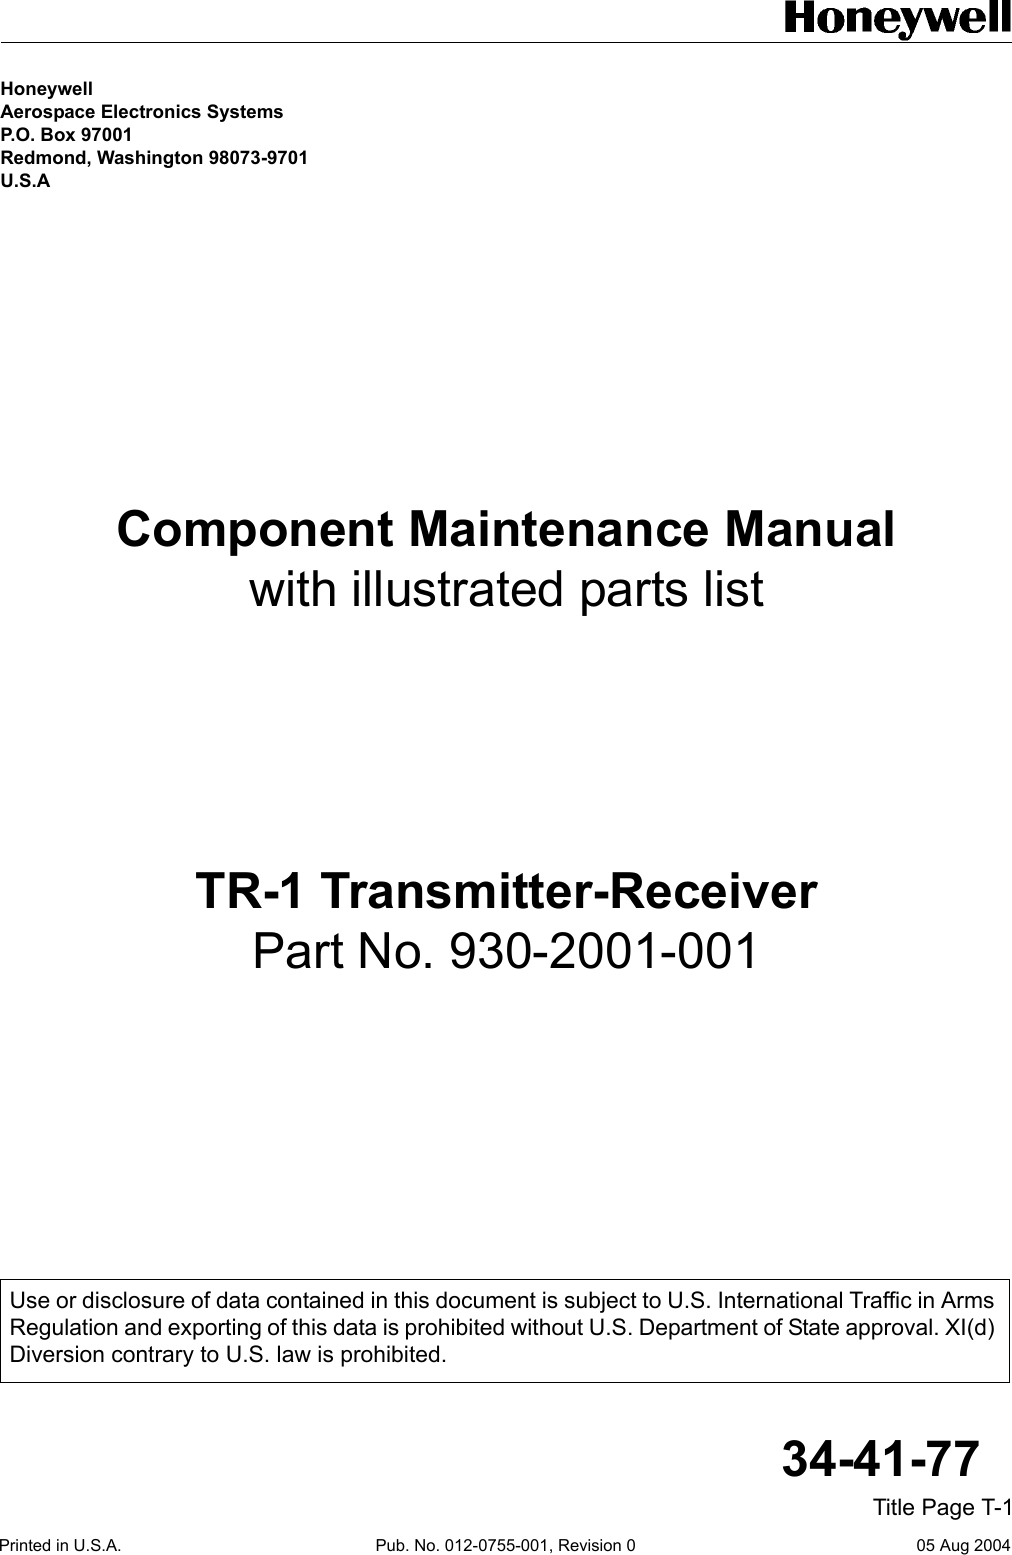 Printed in U.S.A. Pub. No. 012-0755-001, Revision 0 05 Aug 2004Title Page T-134-41-77Honeywell Aerospace Electronics Systems P.O. Box 97001 Redmond, Washington 98073-9701 U.S.AComponent Maintenance Manualwith illustrated parts listTR-1 Transmitter-ReceiverPart No. 930-2001-001Use or disclosure of data contained in this document is subject to U.S. International Traffic in Arms Regulation and exporting of this data is prohibited without U.S. Department of State approval. XI(d) Diversion contrary to U.S. law is prohibited.